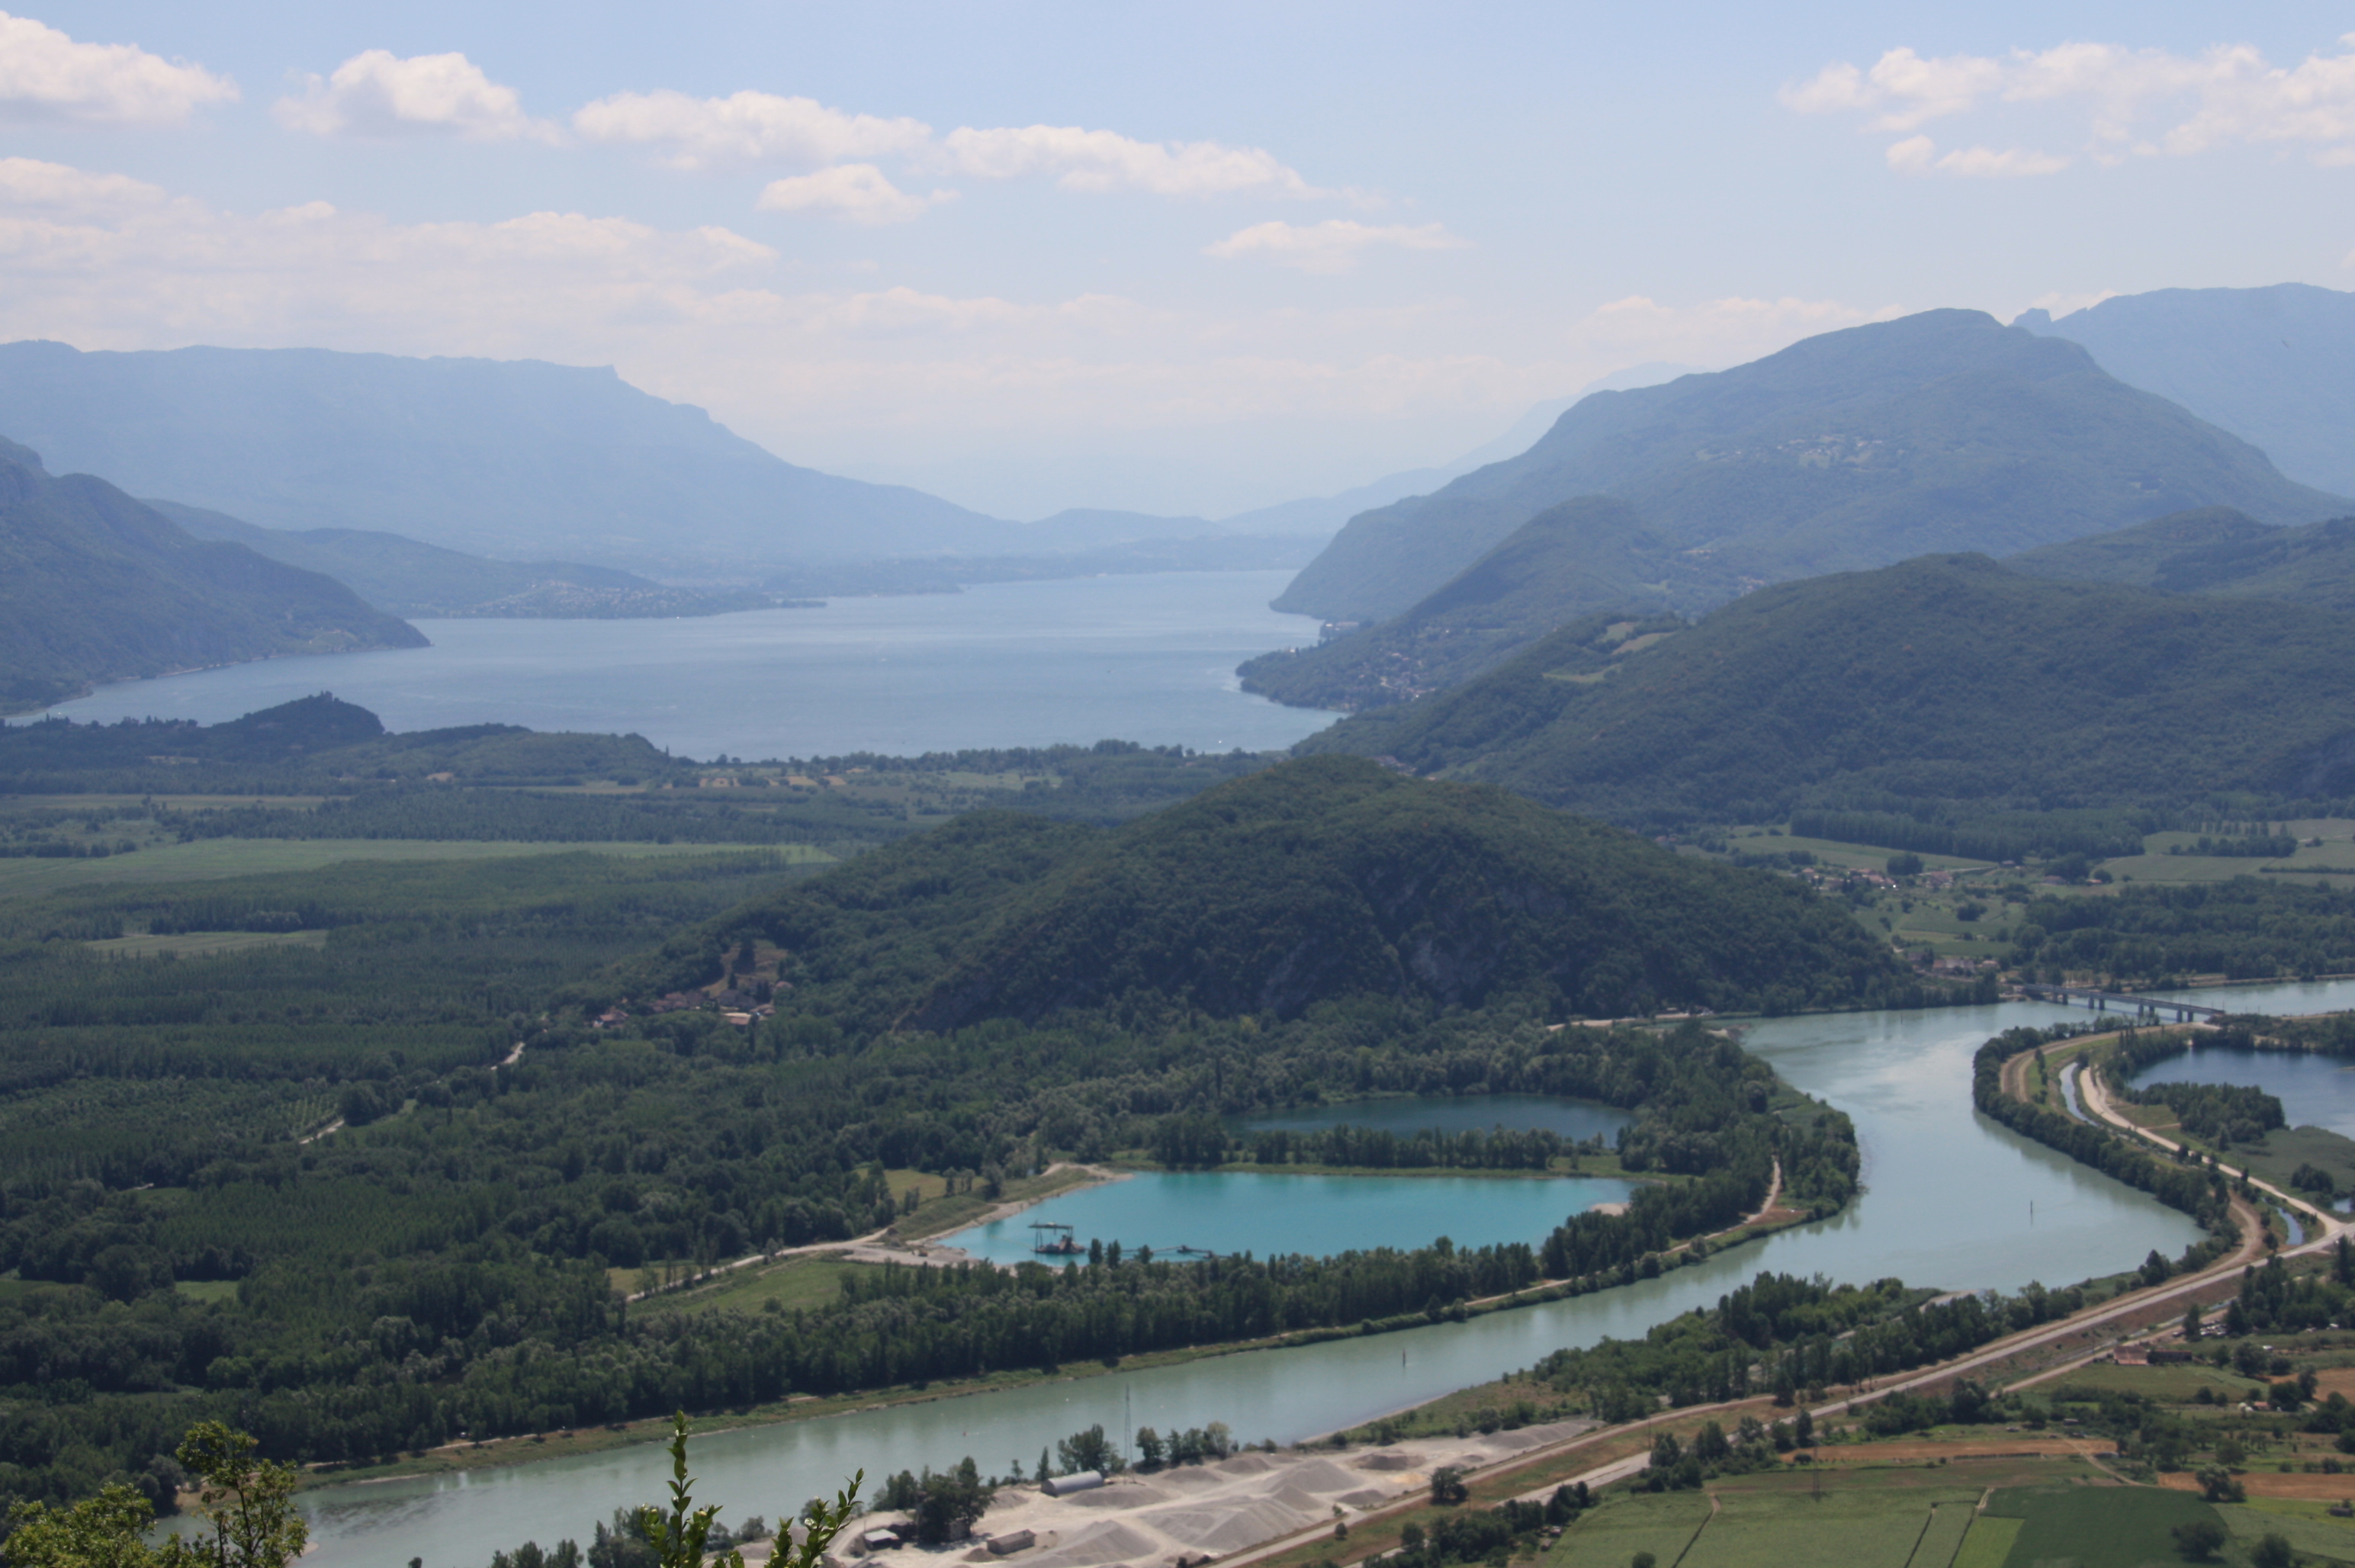 http://upload.wikimedia.org/wikipedia/commons/3/30/Vue_lac_bourget_colombier_1007.jpg